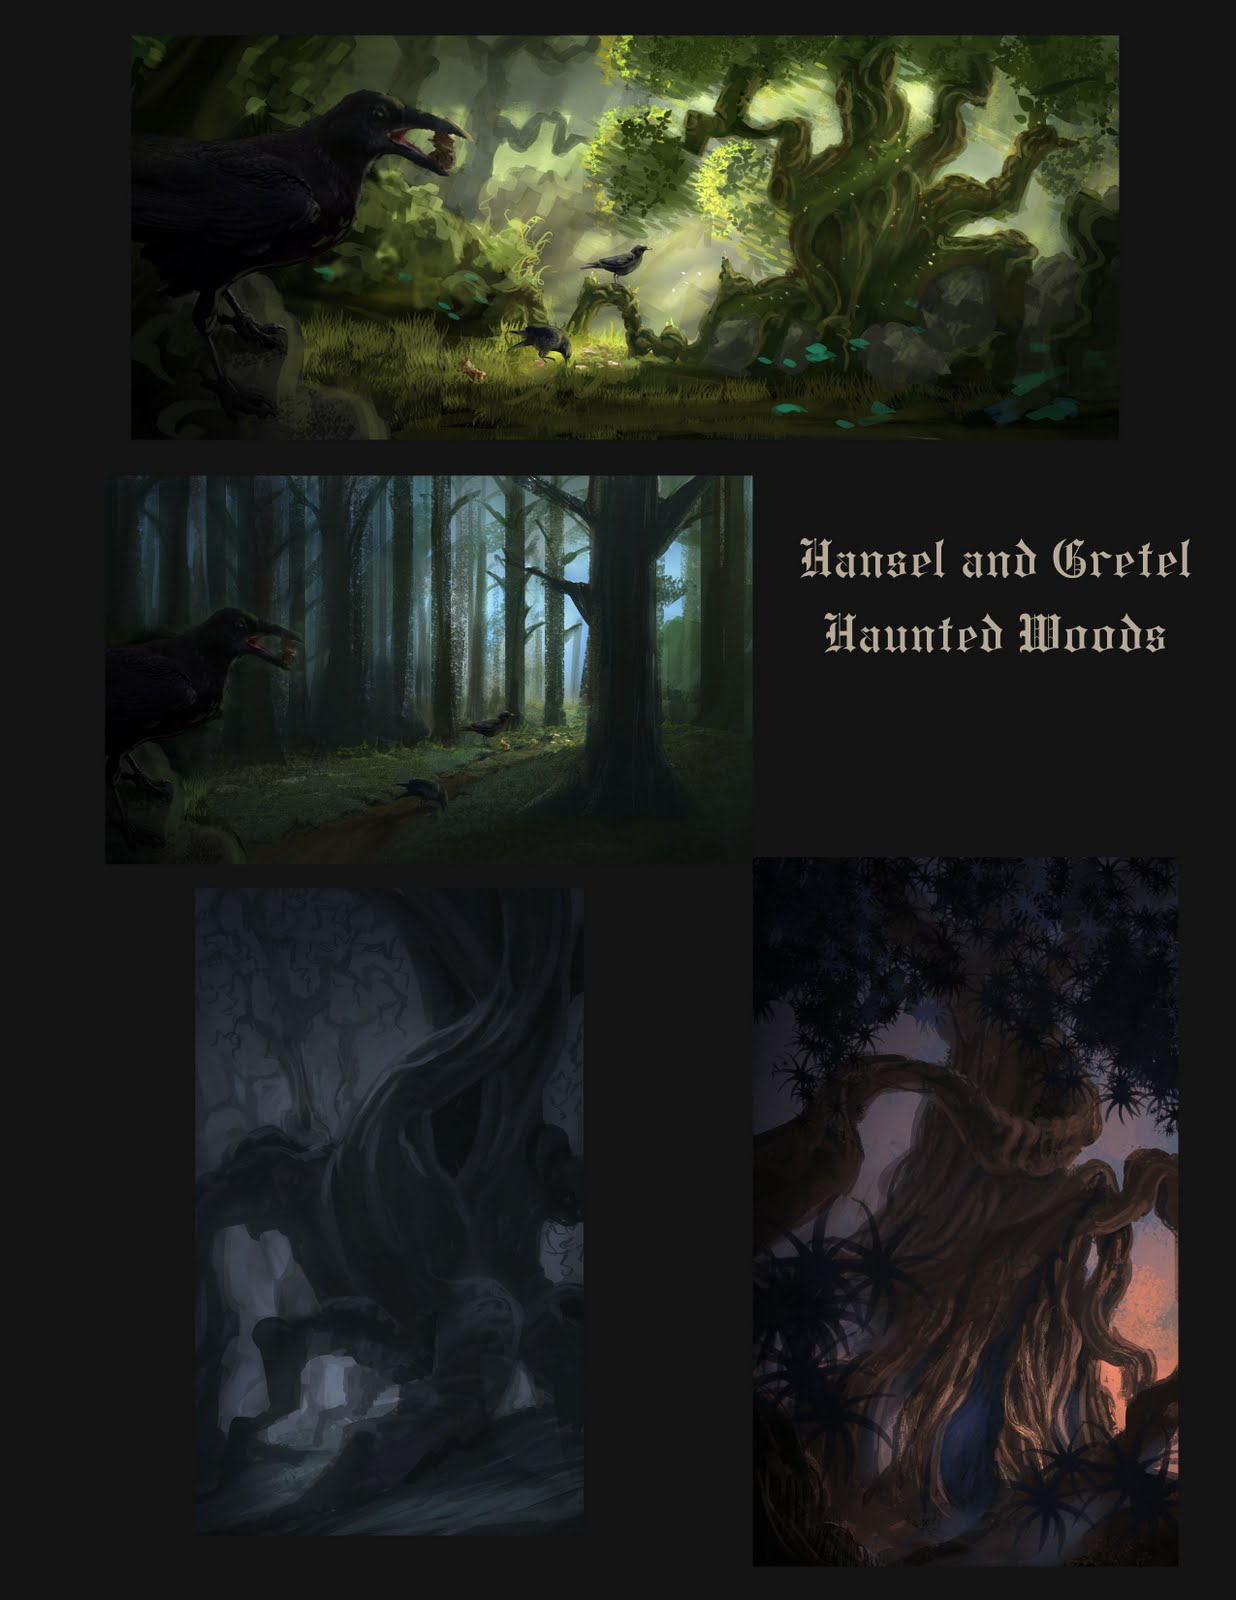 Hansel and Gretel: The Haunted Forest1236 x 1600